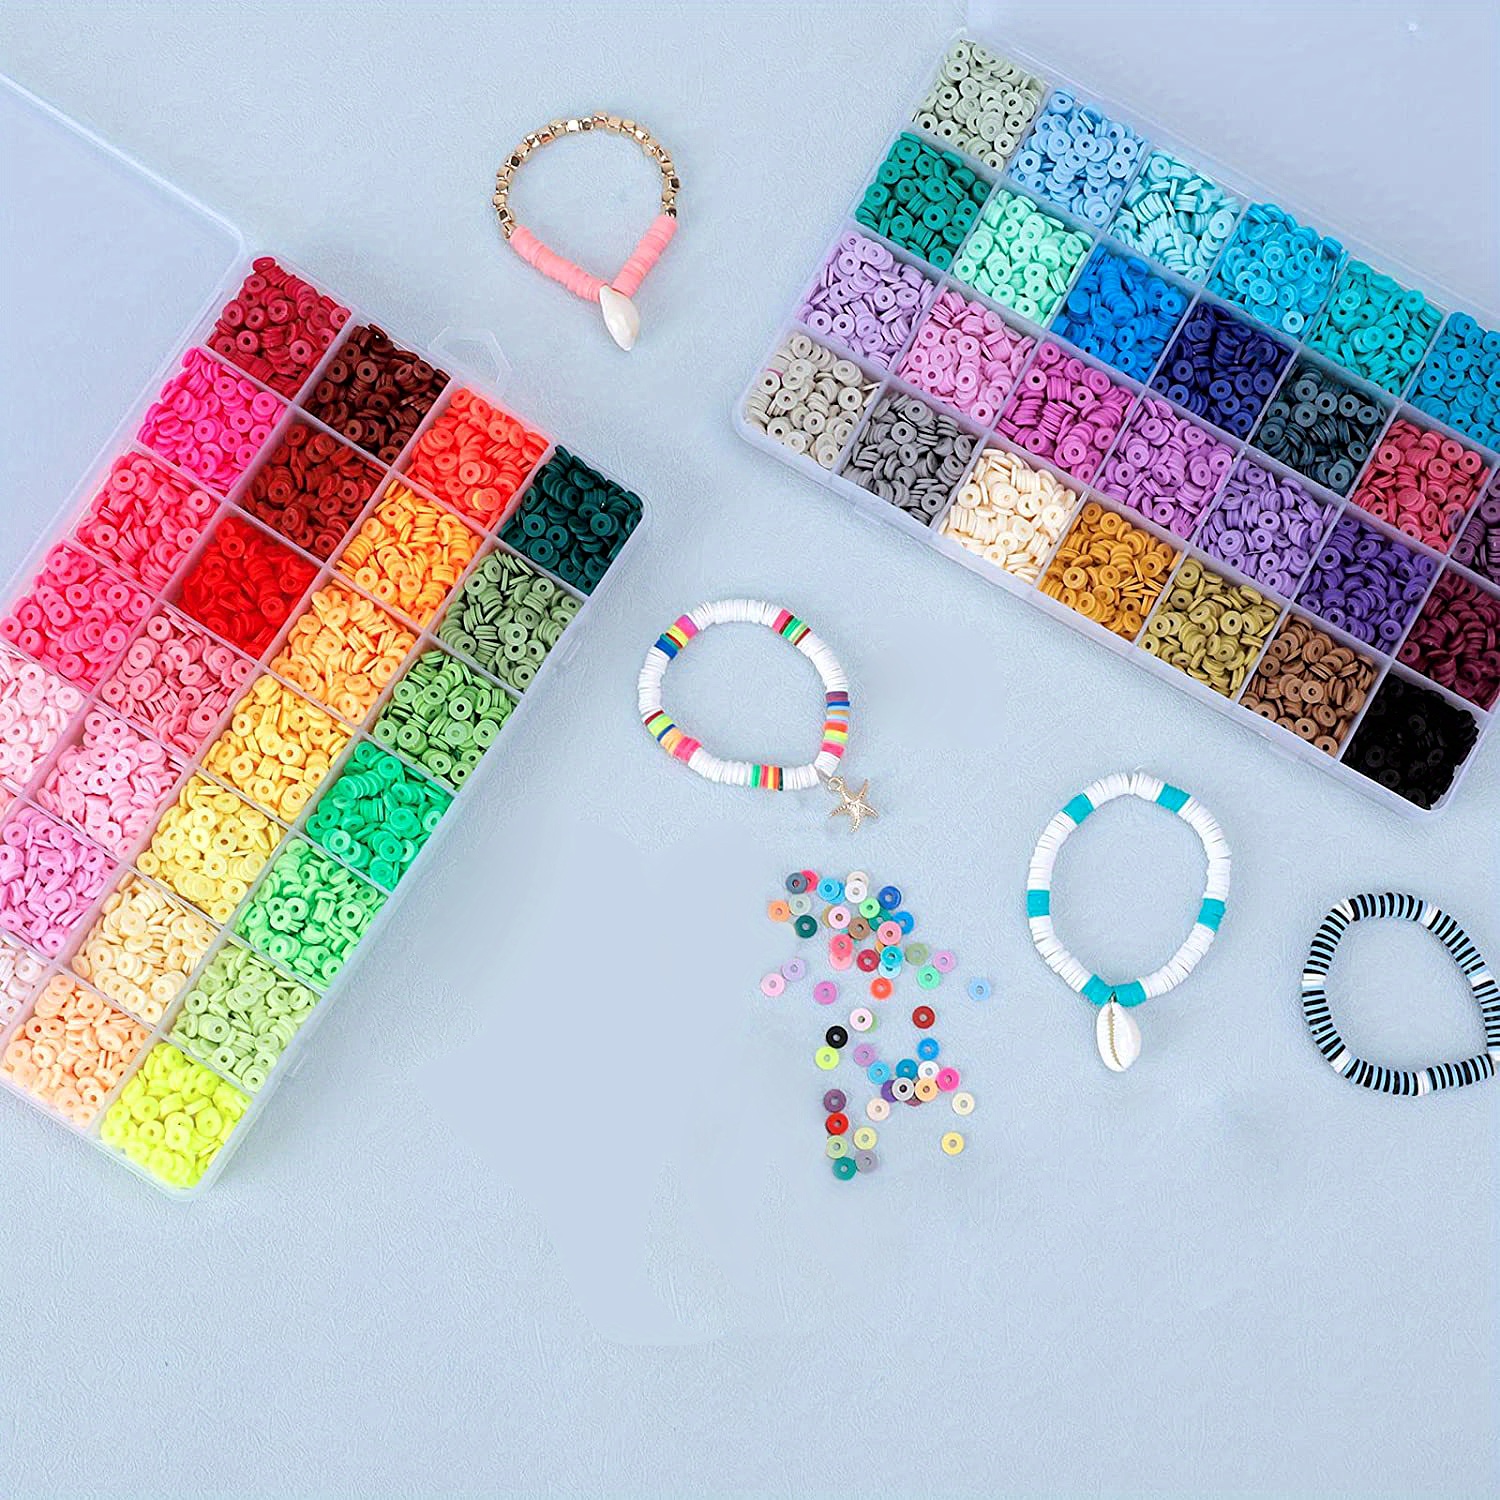  Deinduser Bracelet Making Kit with Stand - 28 Colors Clay Beads  for Bracelets, Jewelry Making